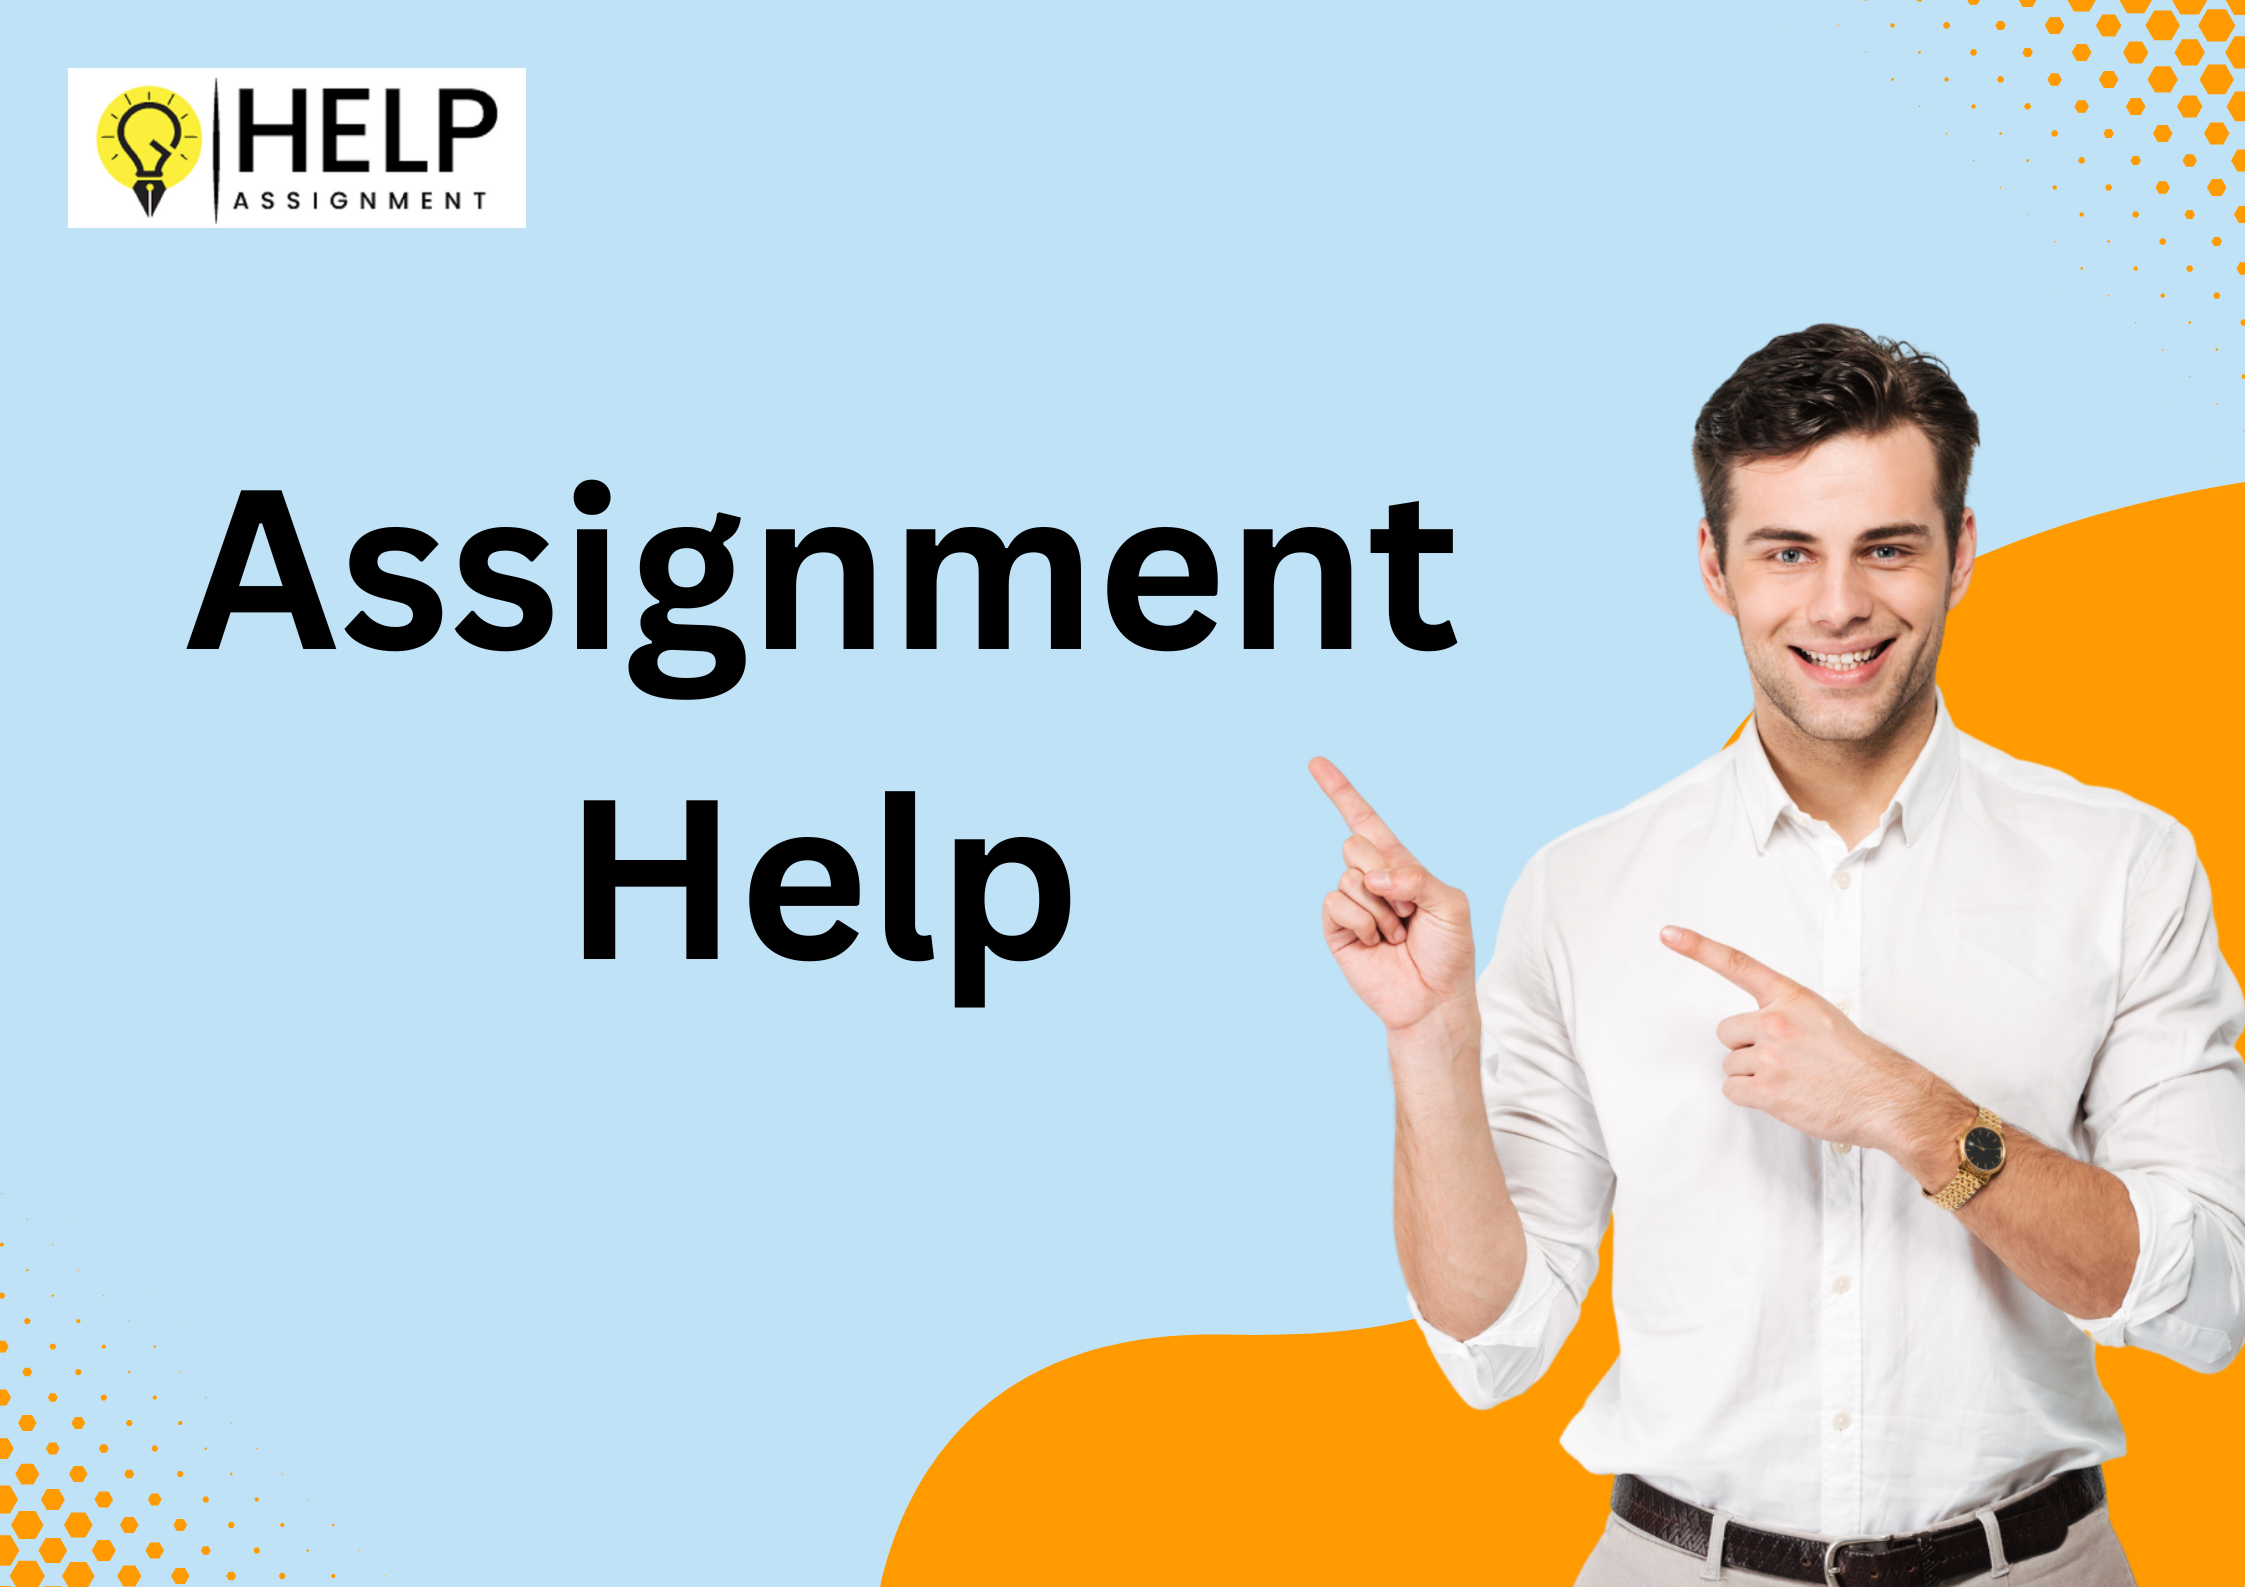 Assignment Provider